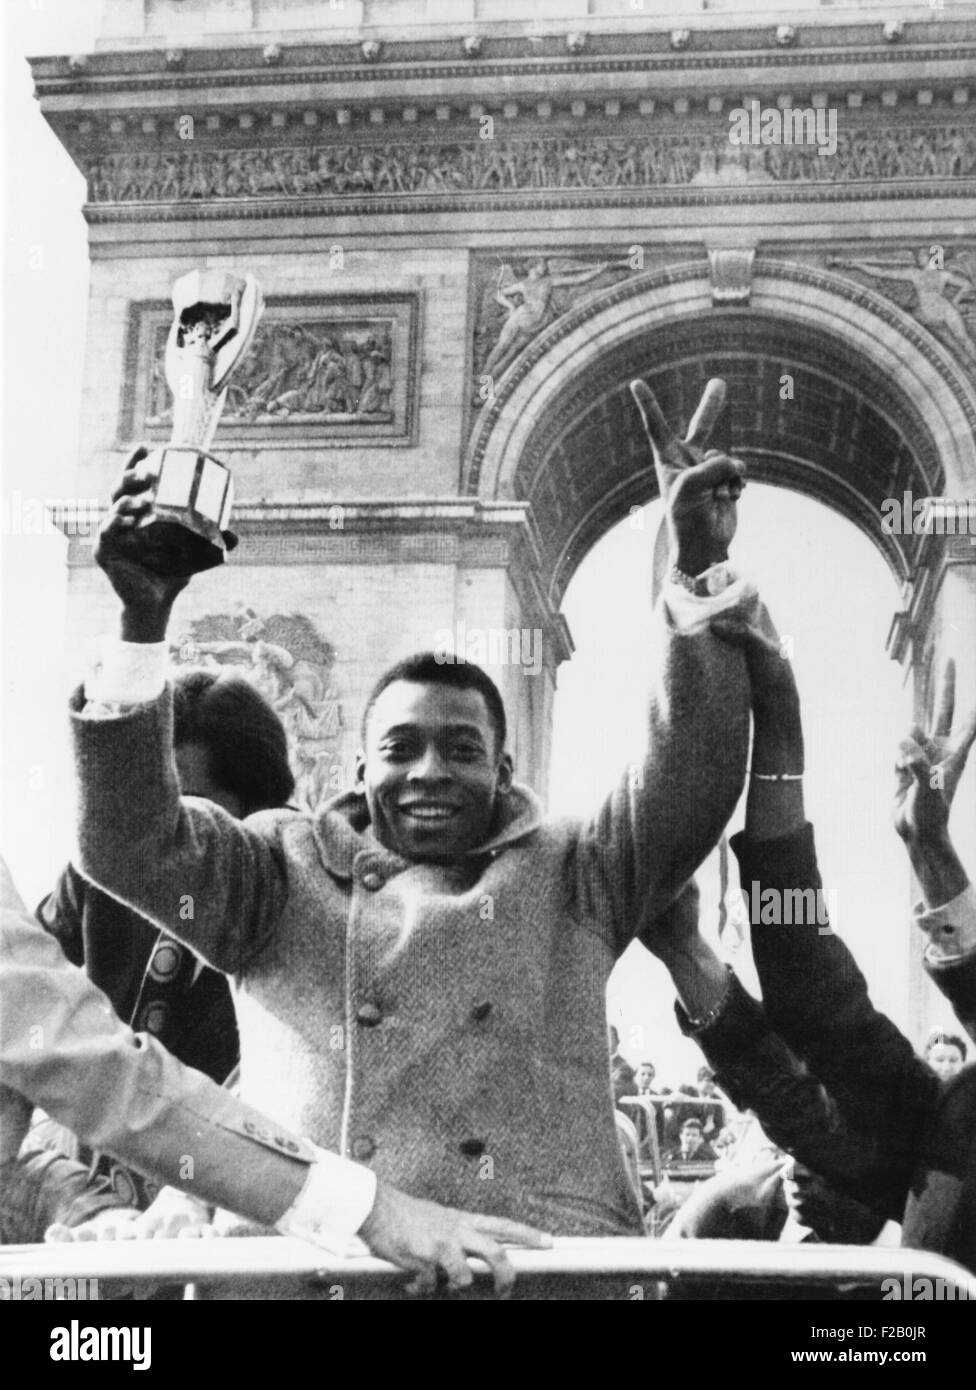 Brazilian soccer star Pele waves the Jules Rimet Cup from an open car on Paris' Champs Elysees. March 30, 1971. In the background is the Arc de Triomphe. Pele played a friendly soccer match at which Bridget Bardot blew the opening whistle and the Foreign Legion provided the band. (CSU 2015 9 1069) Stock Photo